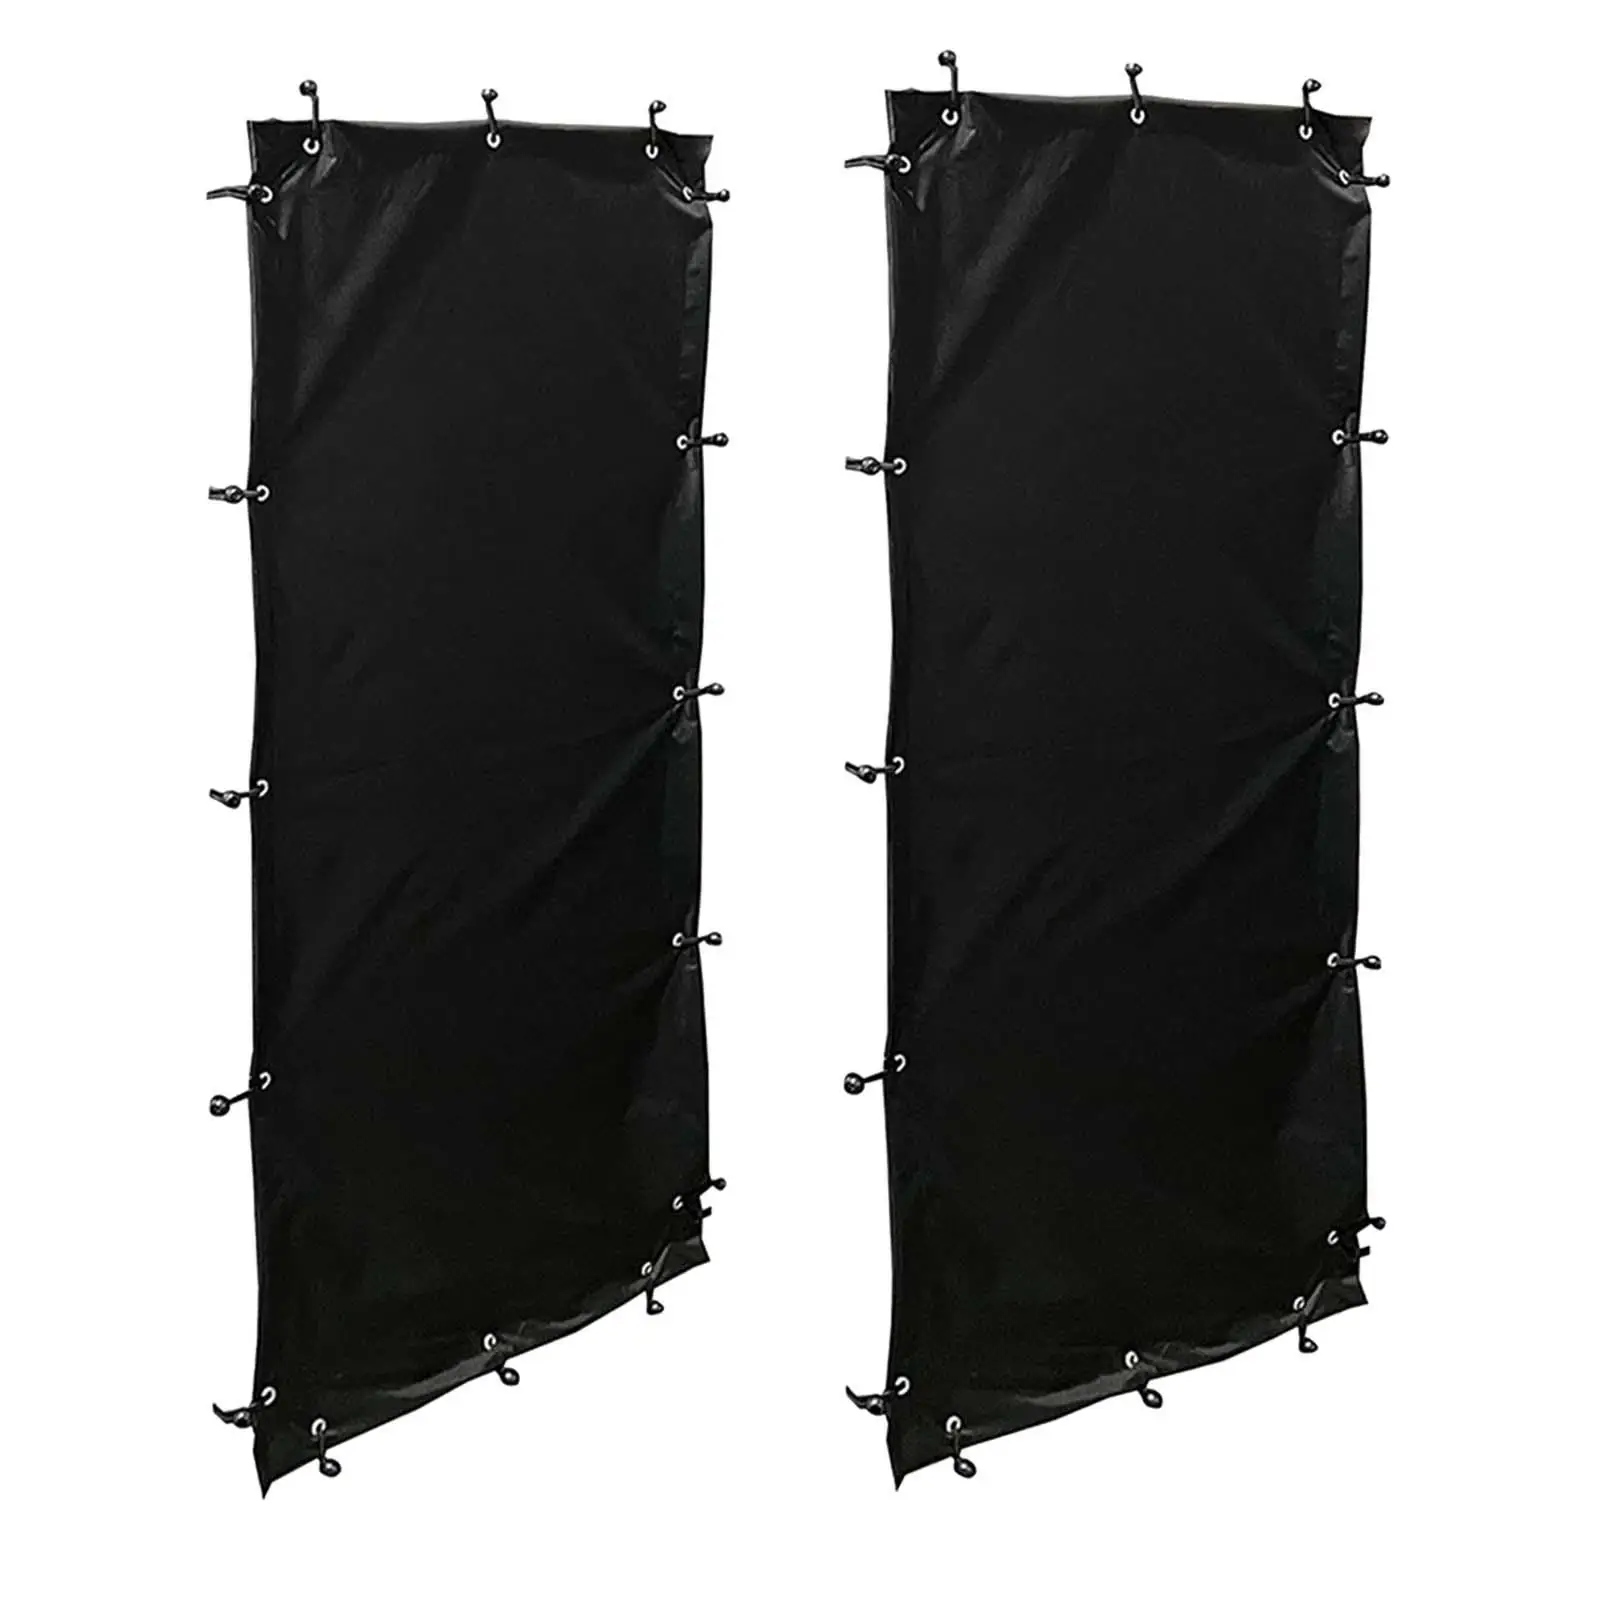 2x Weatherproof Curtain for Firewood Rack 2 Sides Firewood Cover Windproof Waterproof Wood Log Protector for Outdoor Camping BBQ